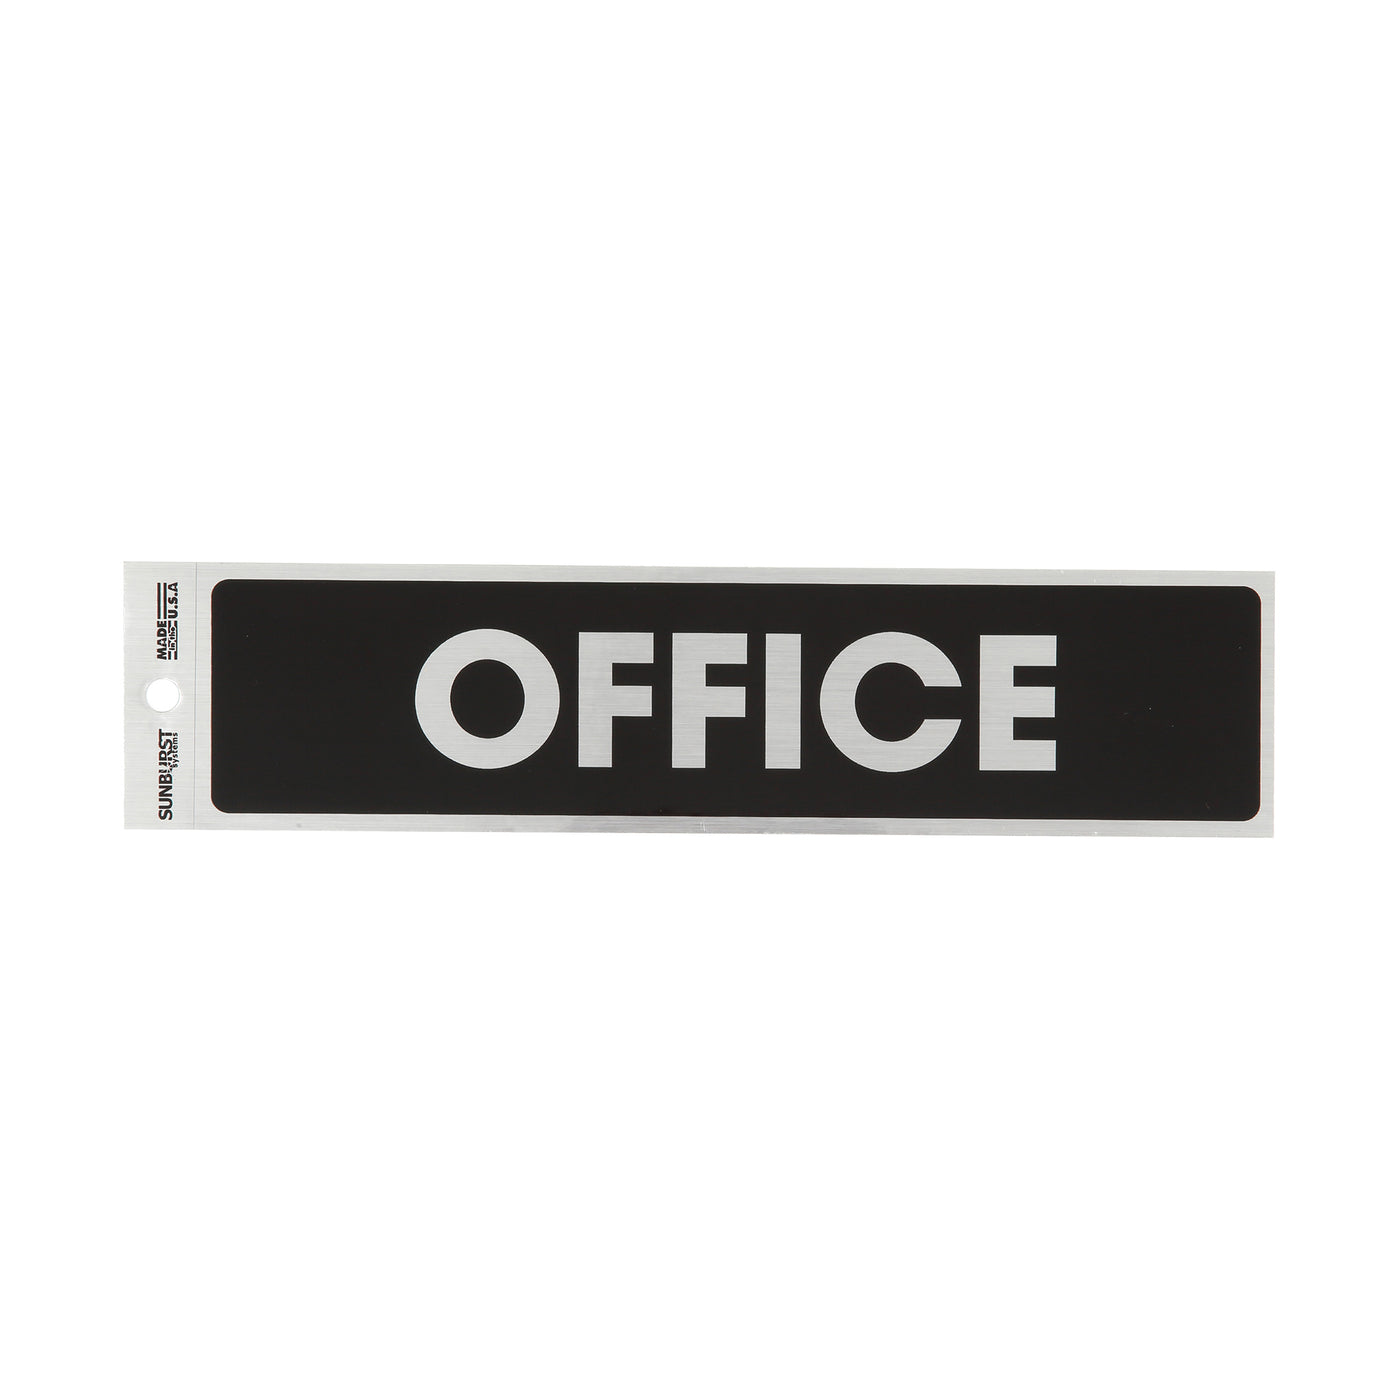 Office Decal